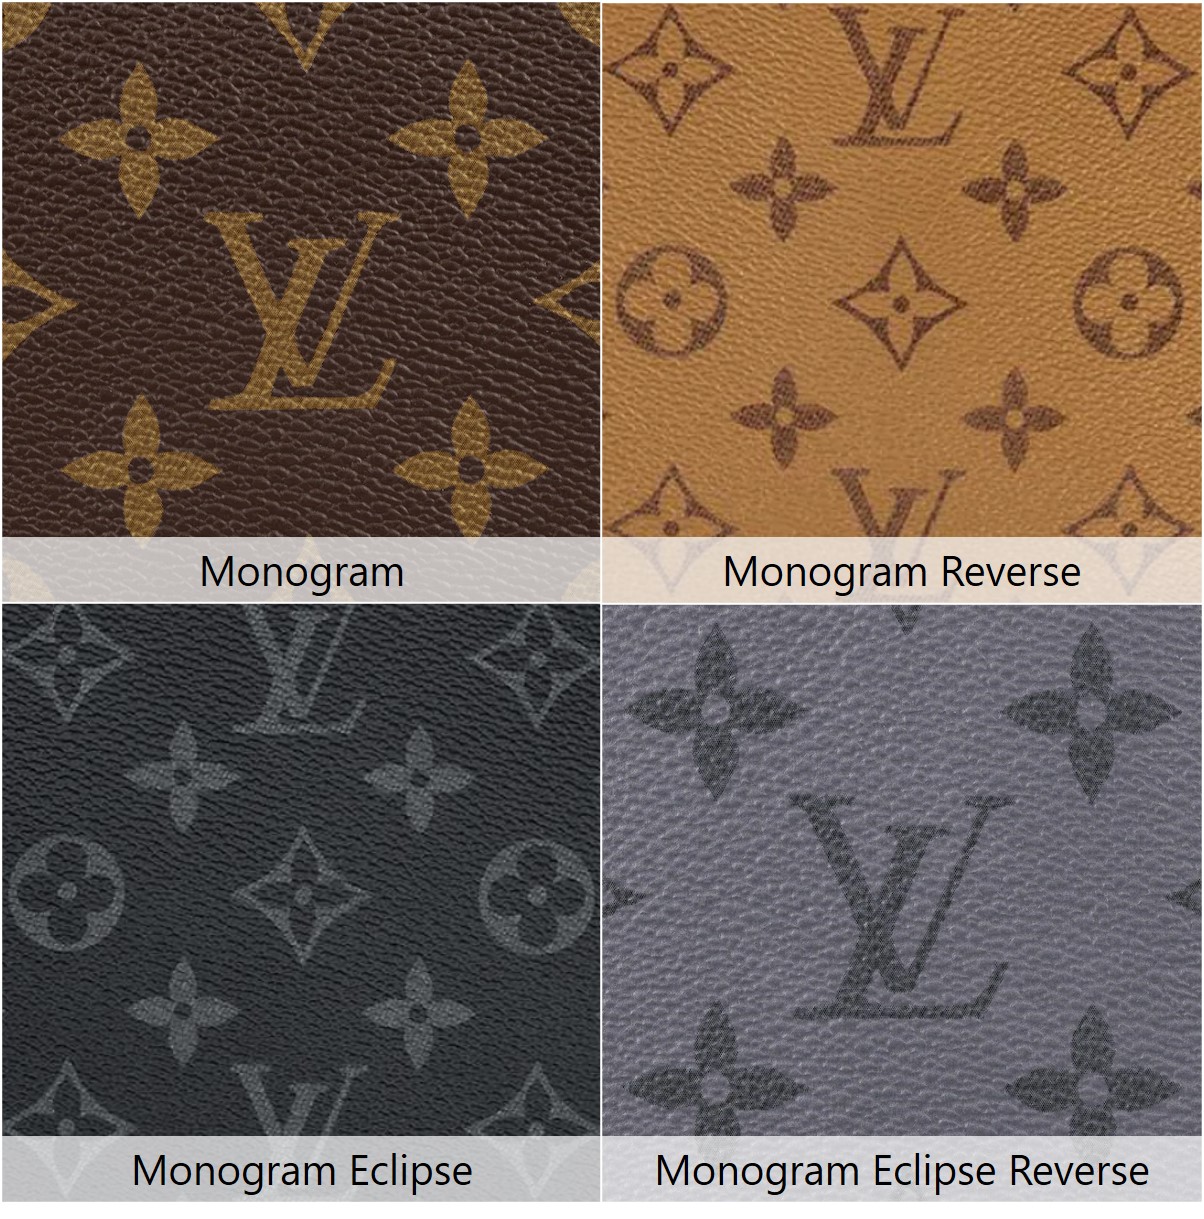 What is the Louis Vuitton pattern called? - Quora